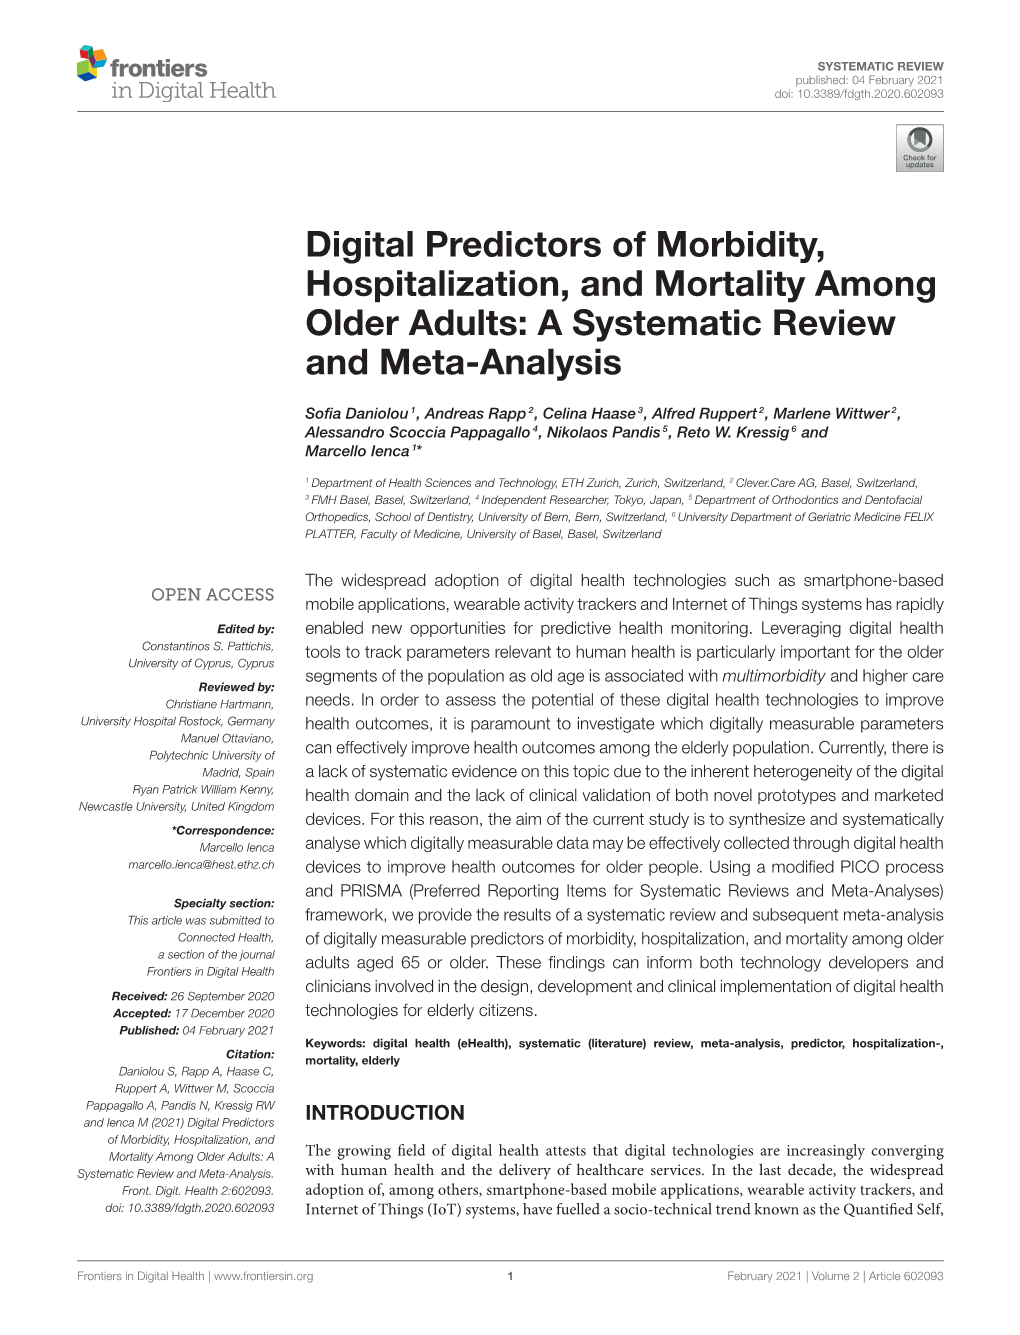 Digital Predictors of Morbidity, Hospitalization, and Mortality Among Older Adults: a Systematic Review and Meta-Analysis